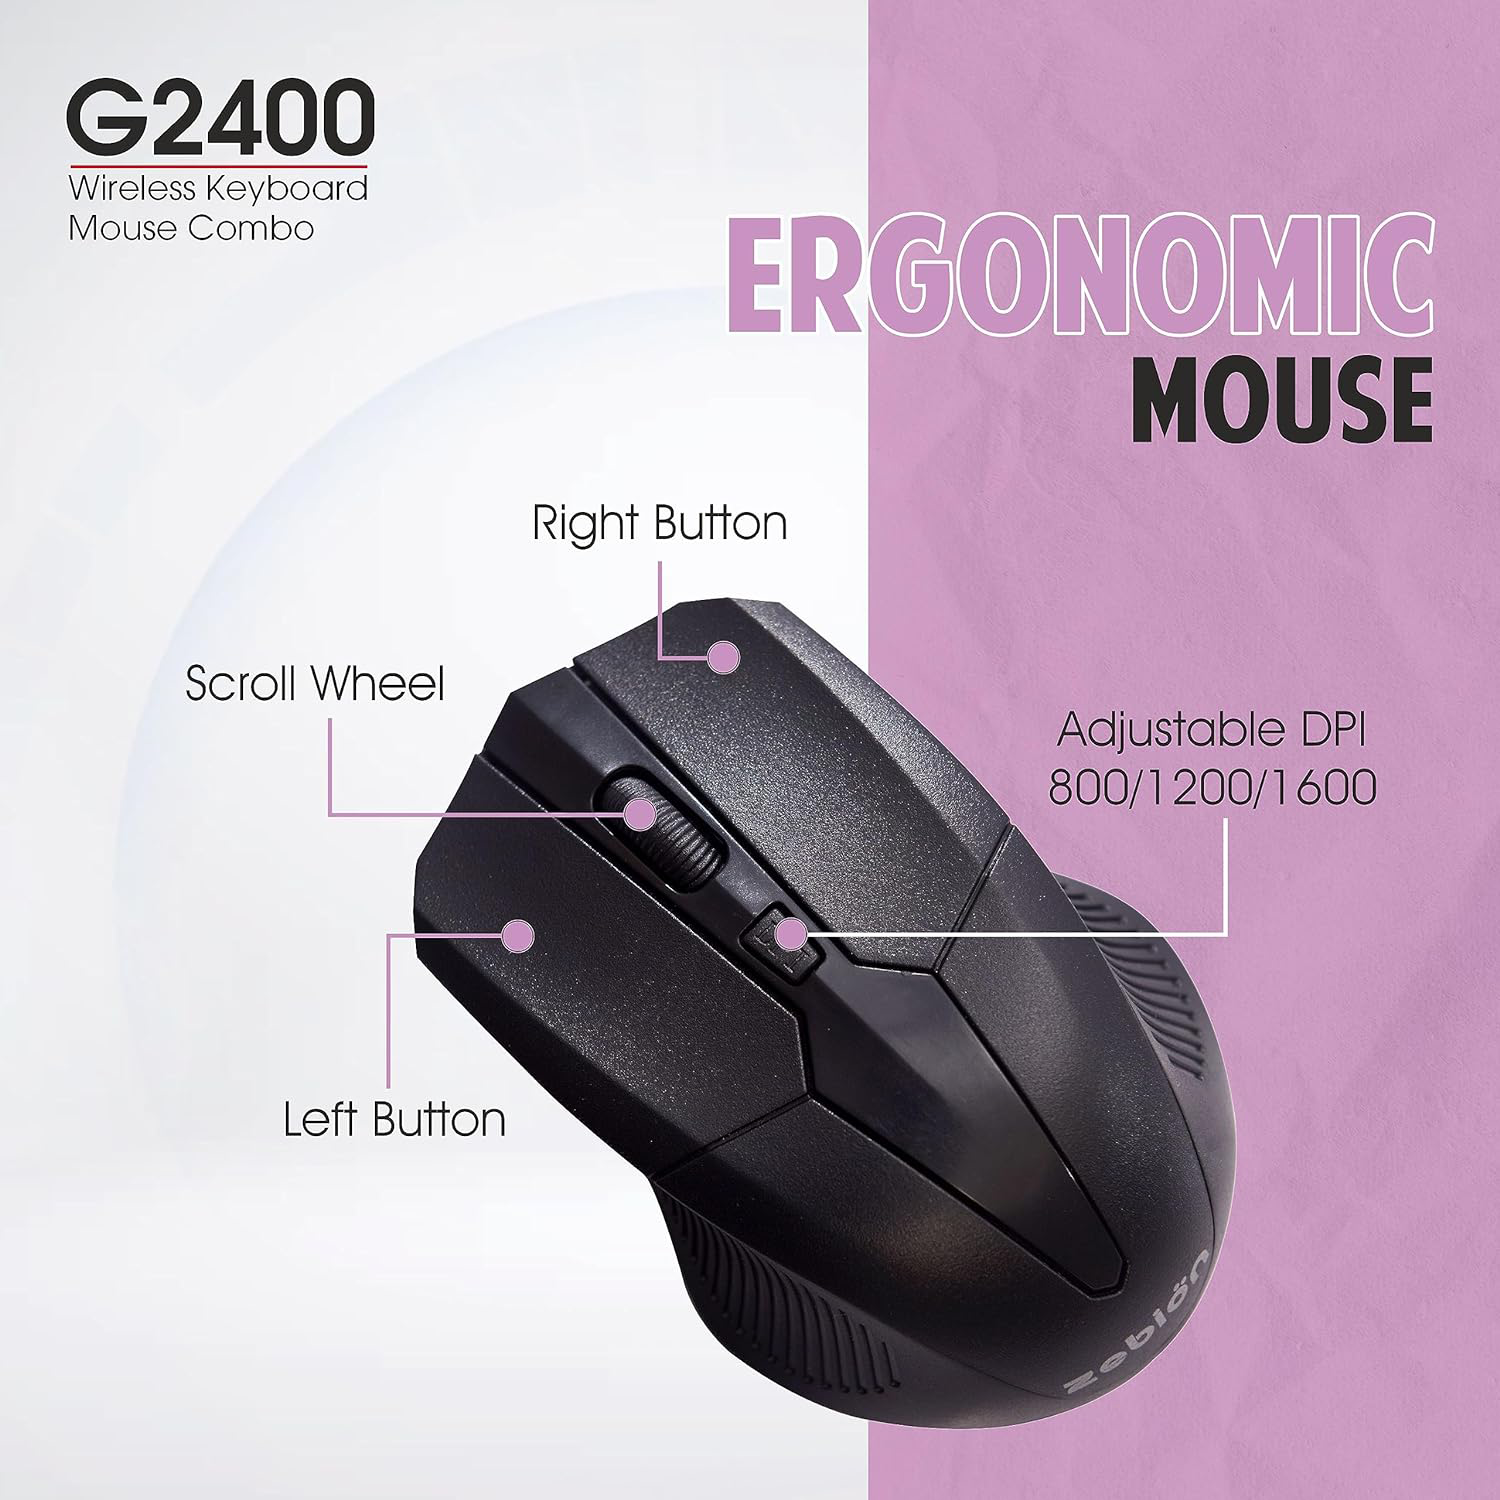 ZEBION G2400 Wireless Keyboard Mouse Combo with Nano Receiver, Slim, Elegant and Ergonomic chiclet Design, Tested with Over 1 Million keystrokes and clicks (Black)